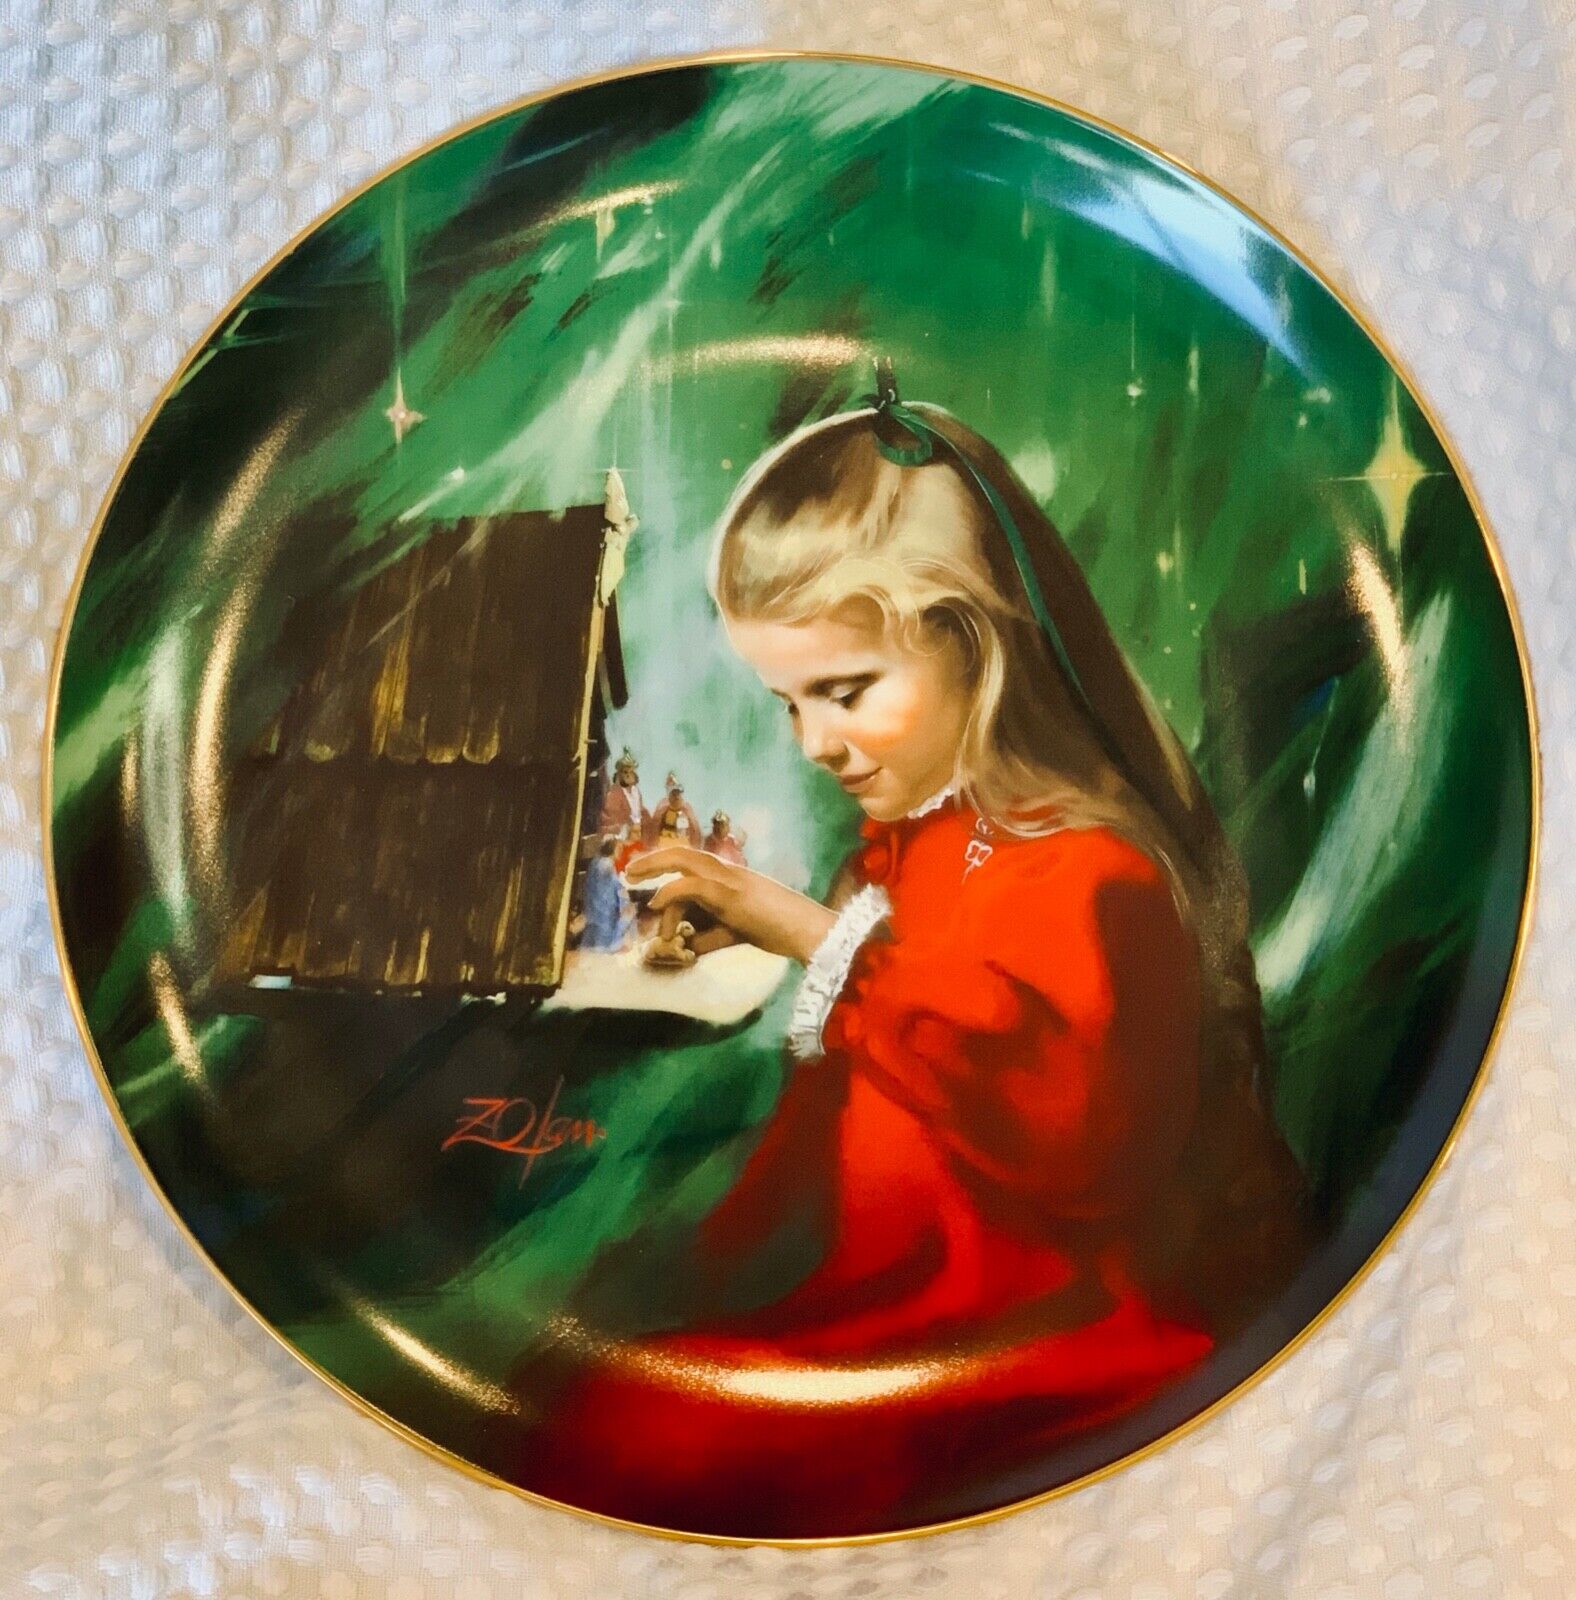 GIRL NATIVITY DISPLAY PLATE Children at Christmas Collection Donald Zolan 10.25\